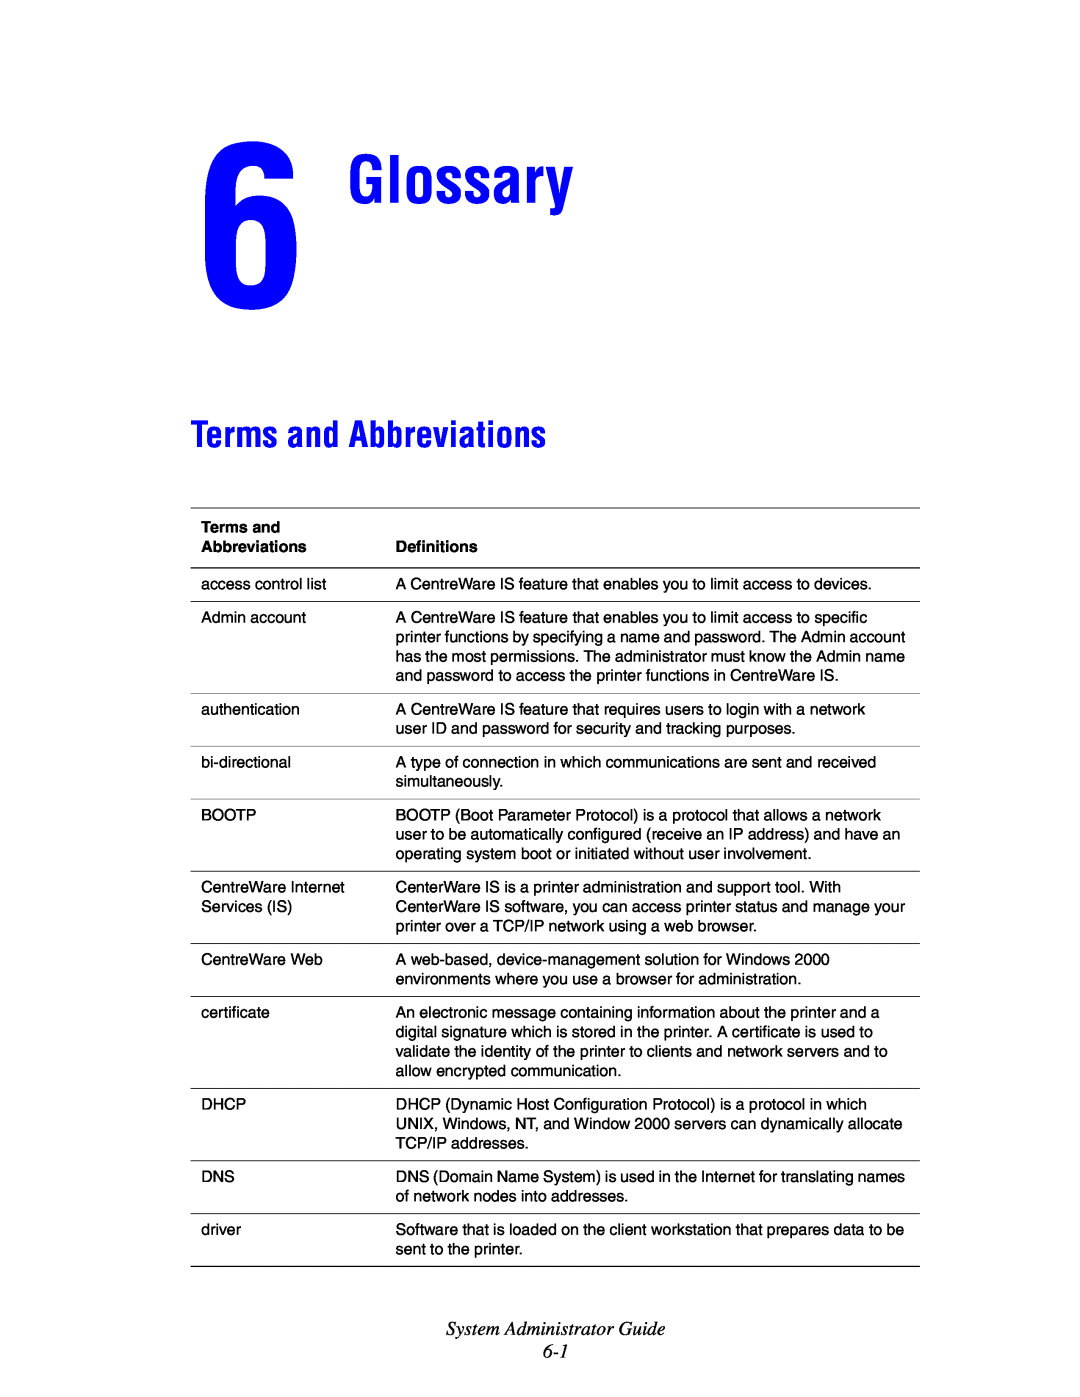 Xerox 1235/DX, 4510, 1235DT manual Glossary, Terms and Abbreviations, System Administrator Guide 6-1, Definitions 